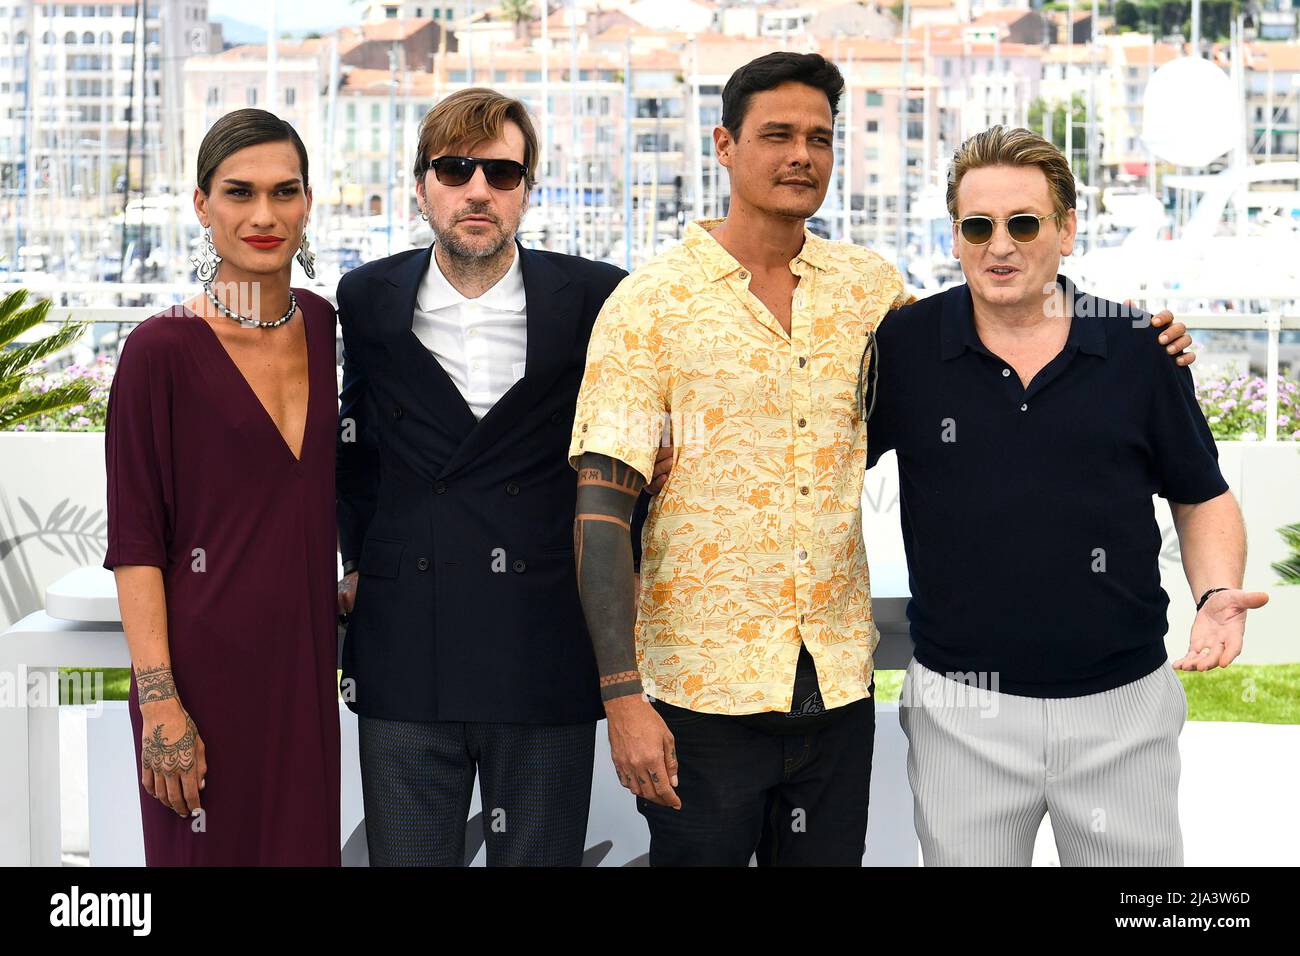 The 75th Cannes Film Festival - Photocall for the film 'Tourment sur les iles' (Pacifiction) in competition - Cannes, France, May 27, 2022. Director Albert Serra and cast members Benoit Magimel, Pahoa Mahagafanau and Matahi Pambrun pose. REUTERS/Piroschka Van De Wouw Stock Photo